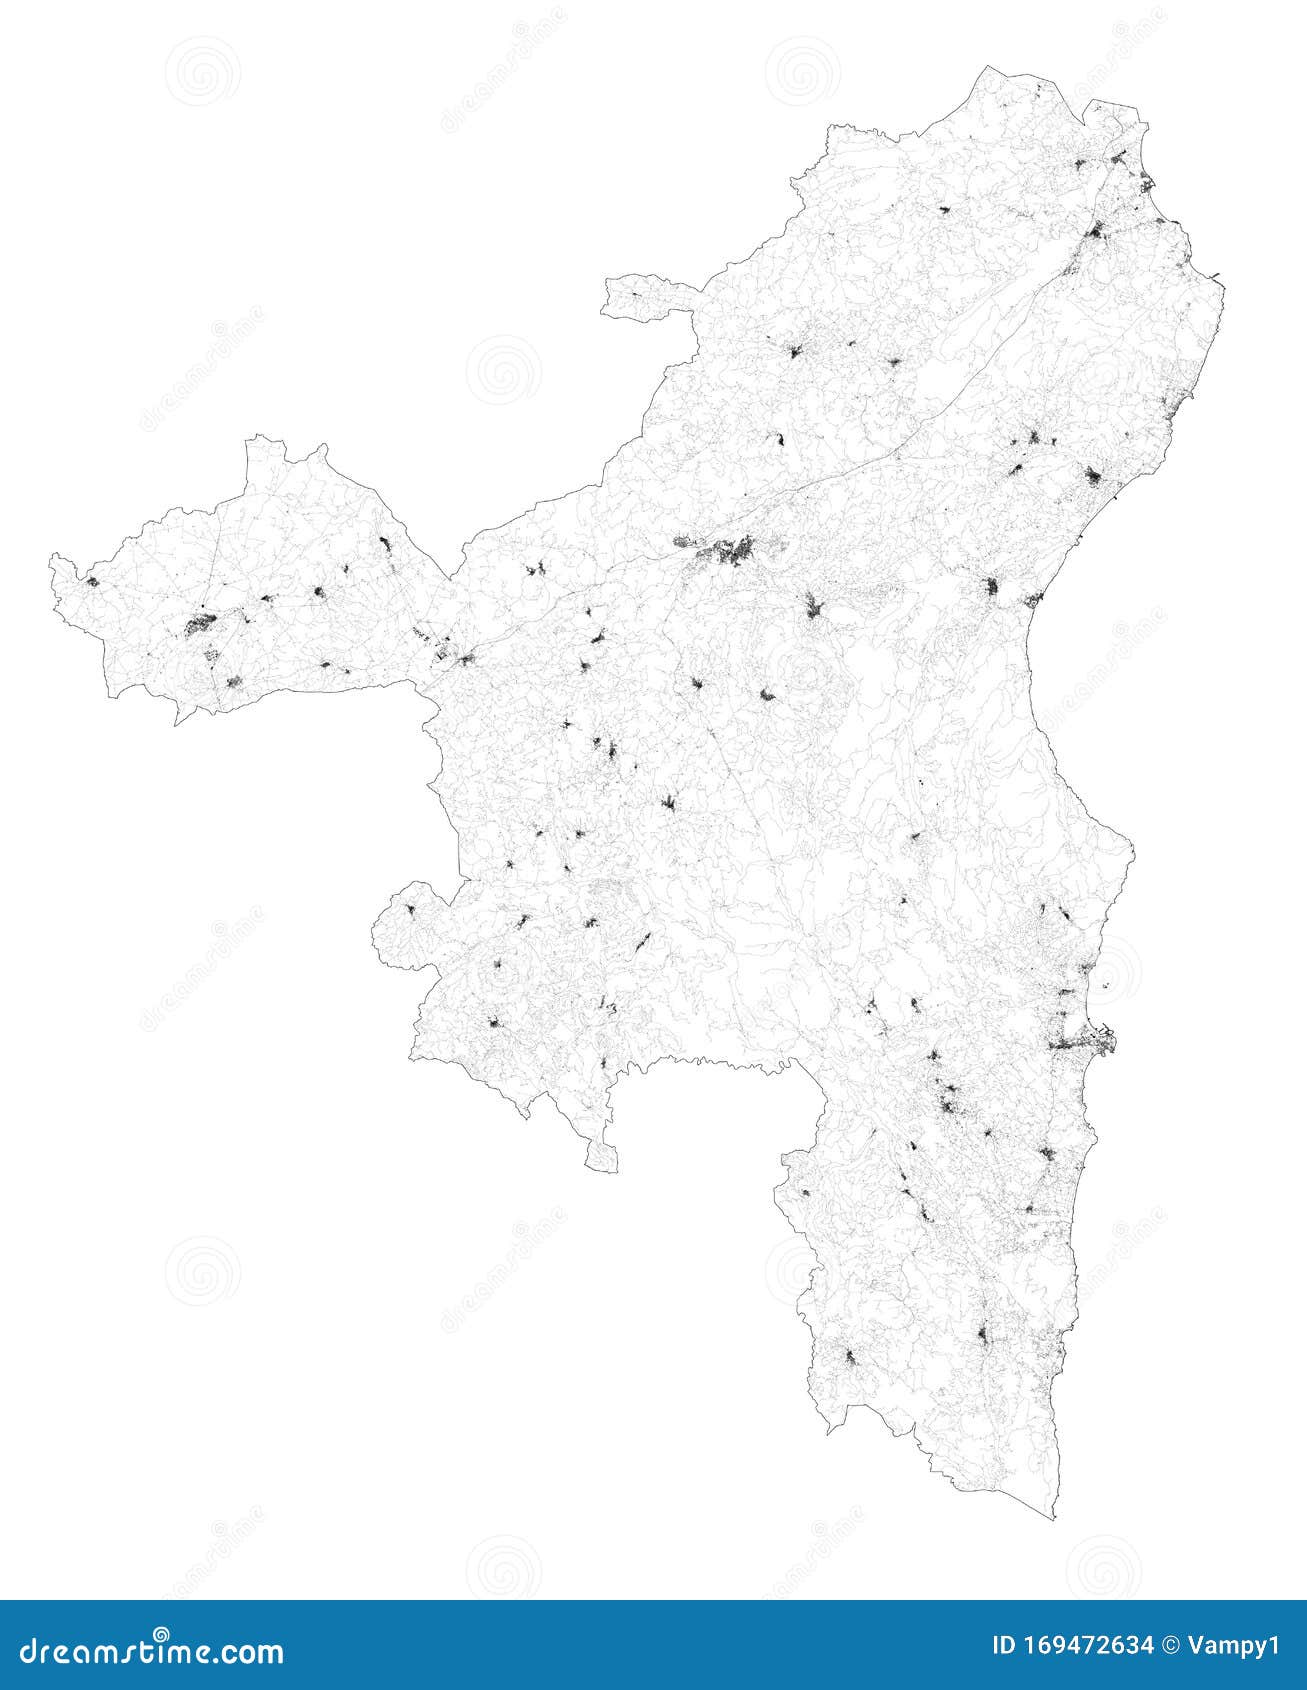 satellite map of province of nuoro towns and roads, buildings and connecting roads. sardinia region, italy. sardegna.